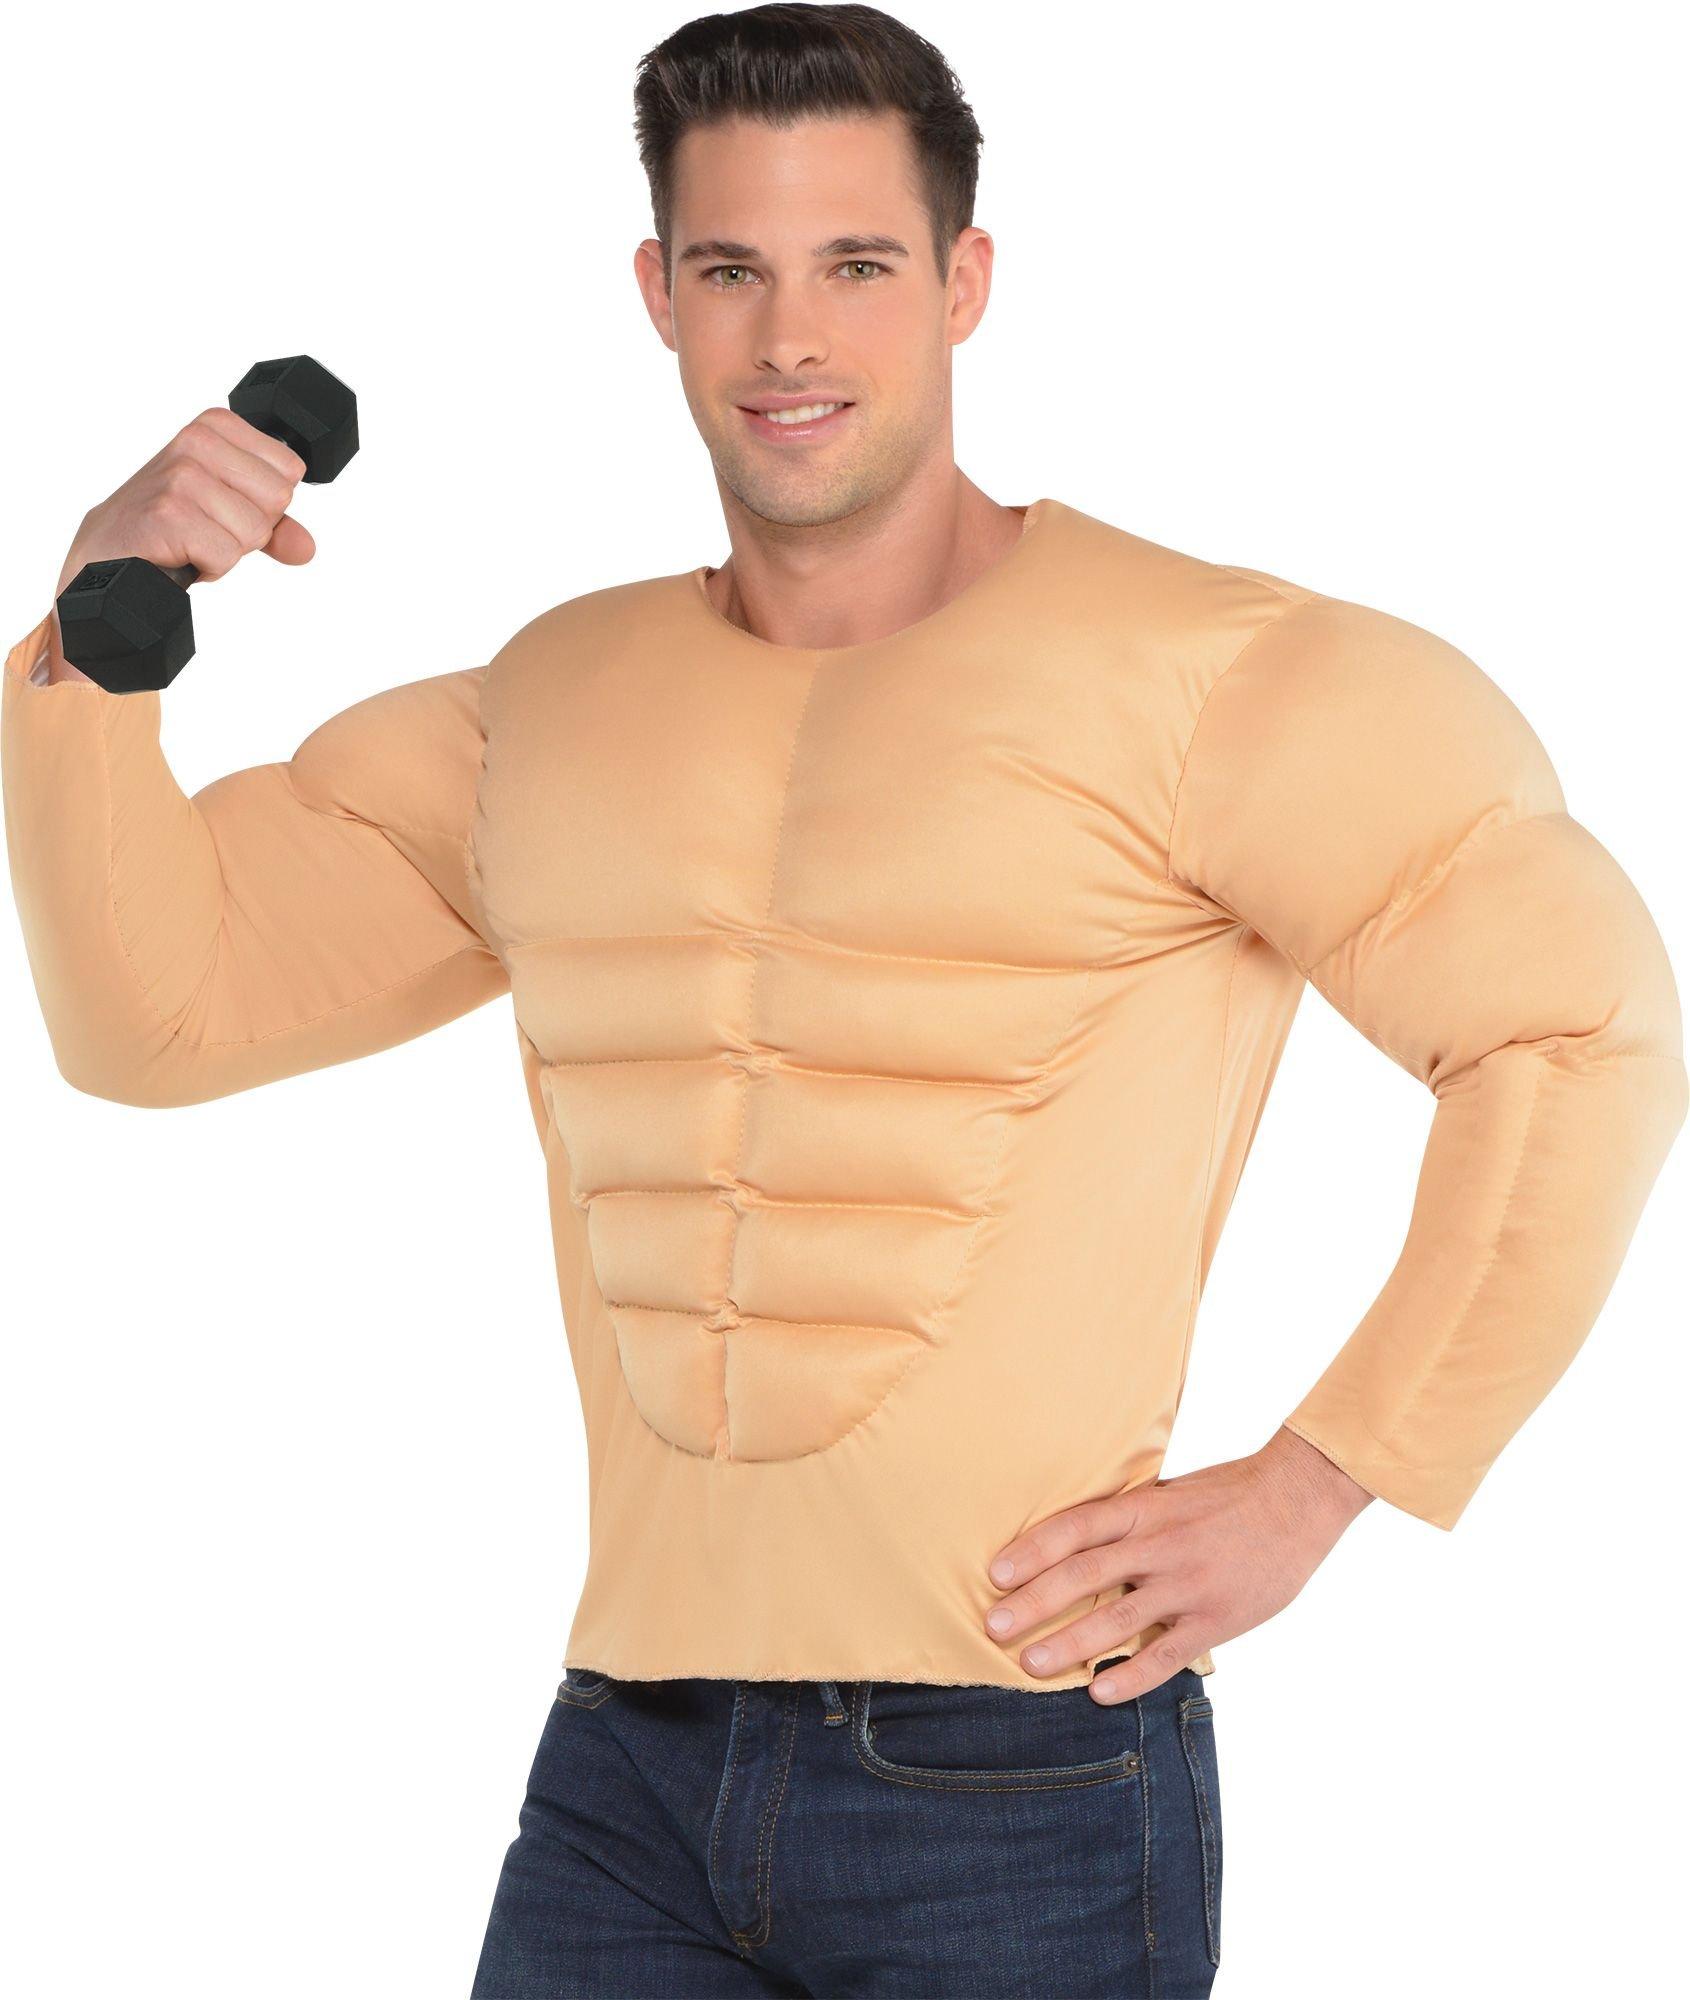 Muscle Suit with Musclar Arms